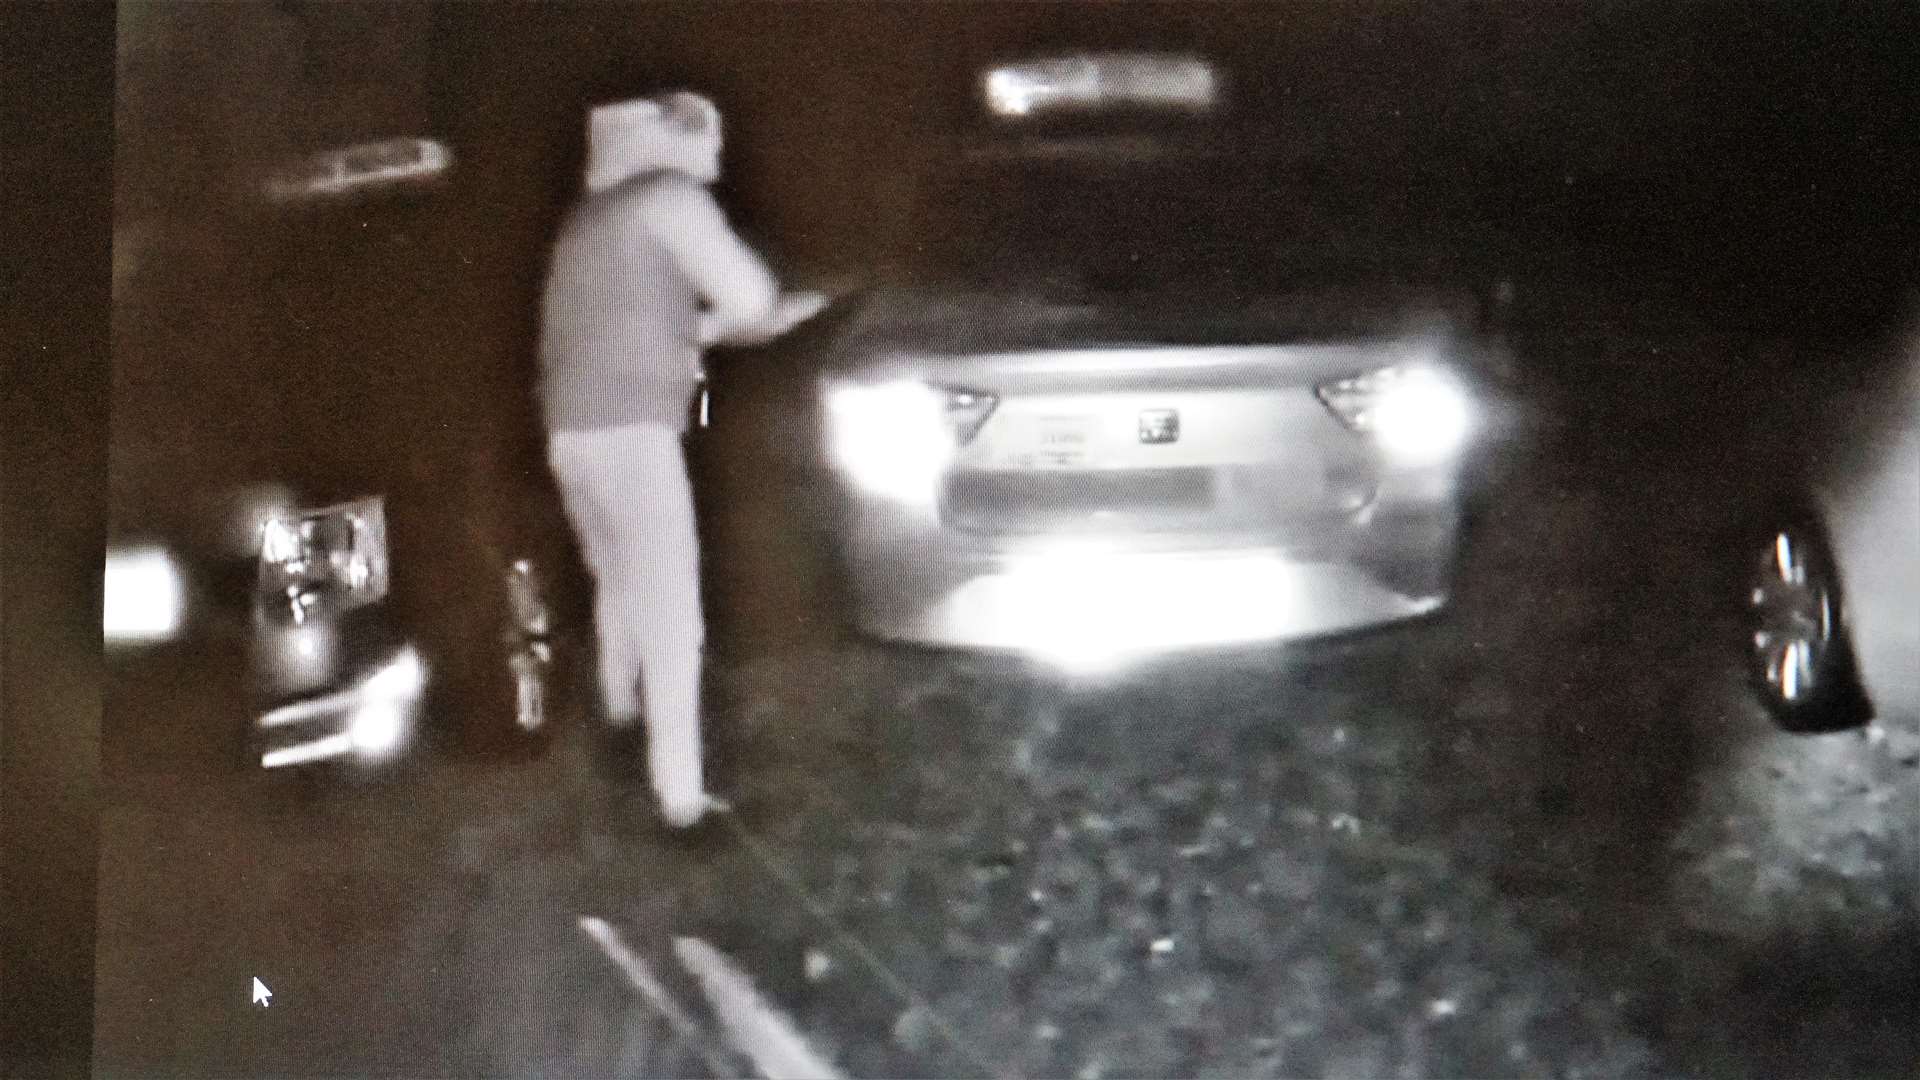 A still taken from the CCTV footage showing the man apparently smearing glue on the cars.